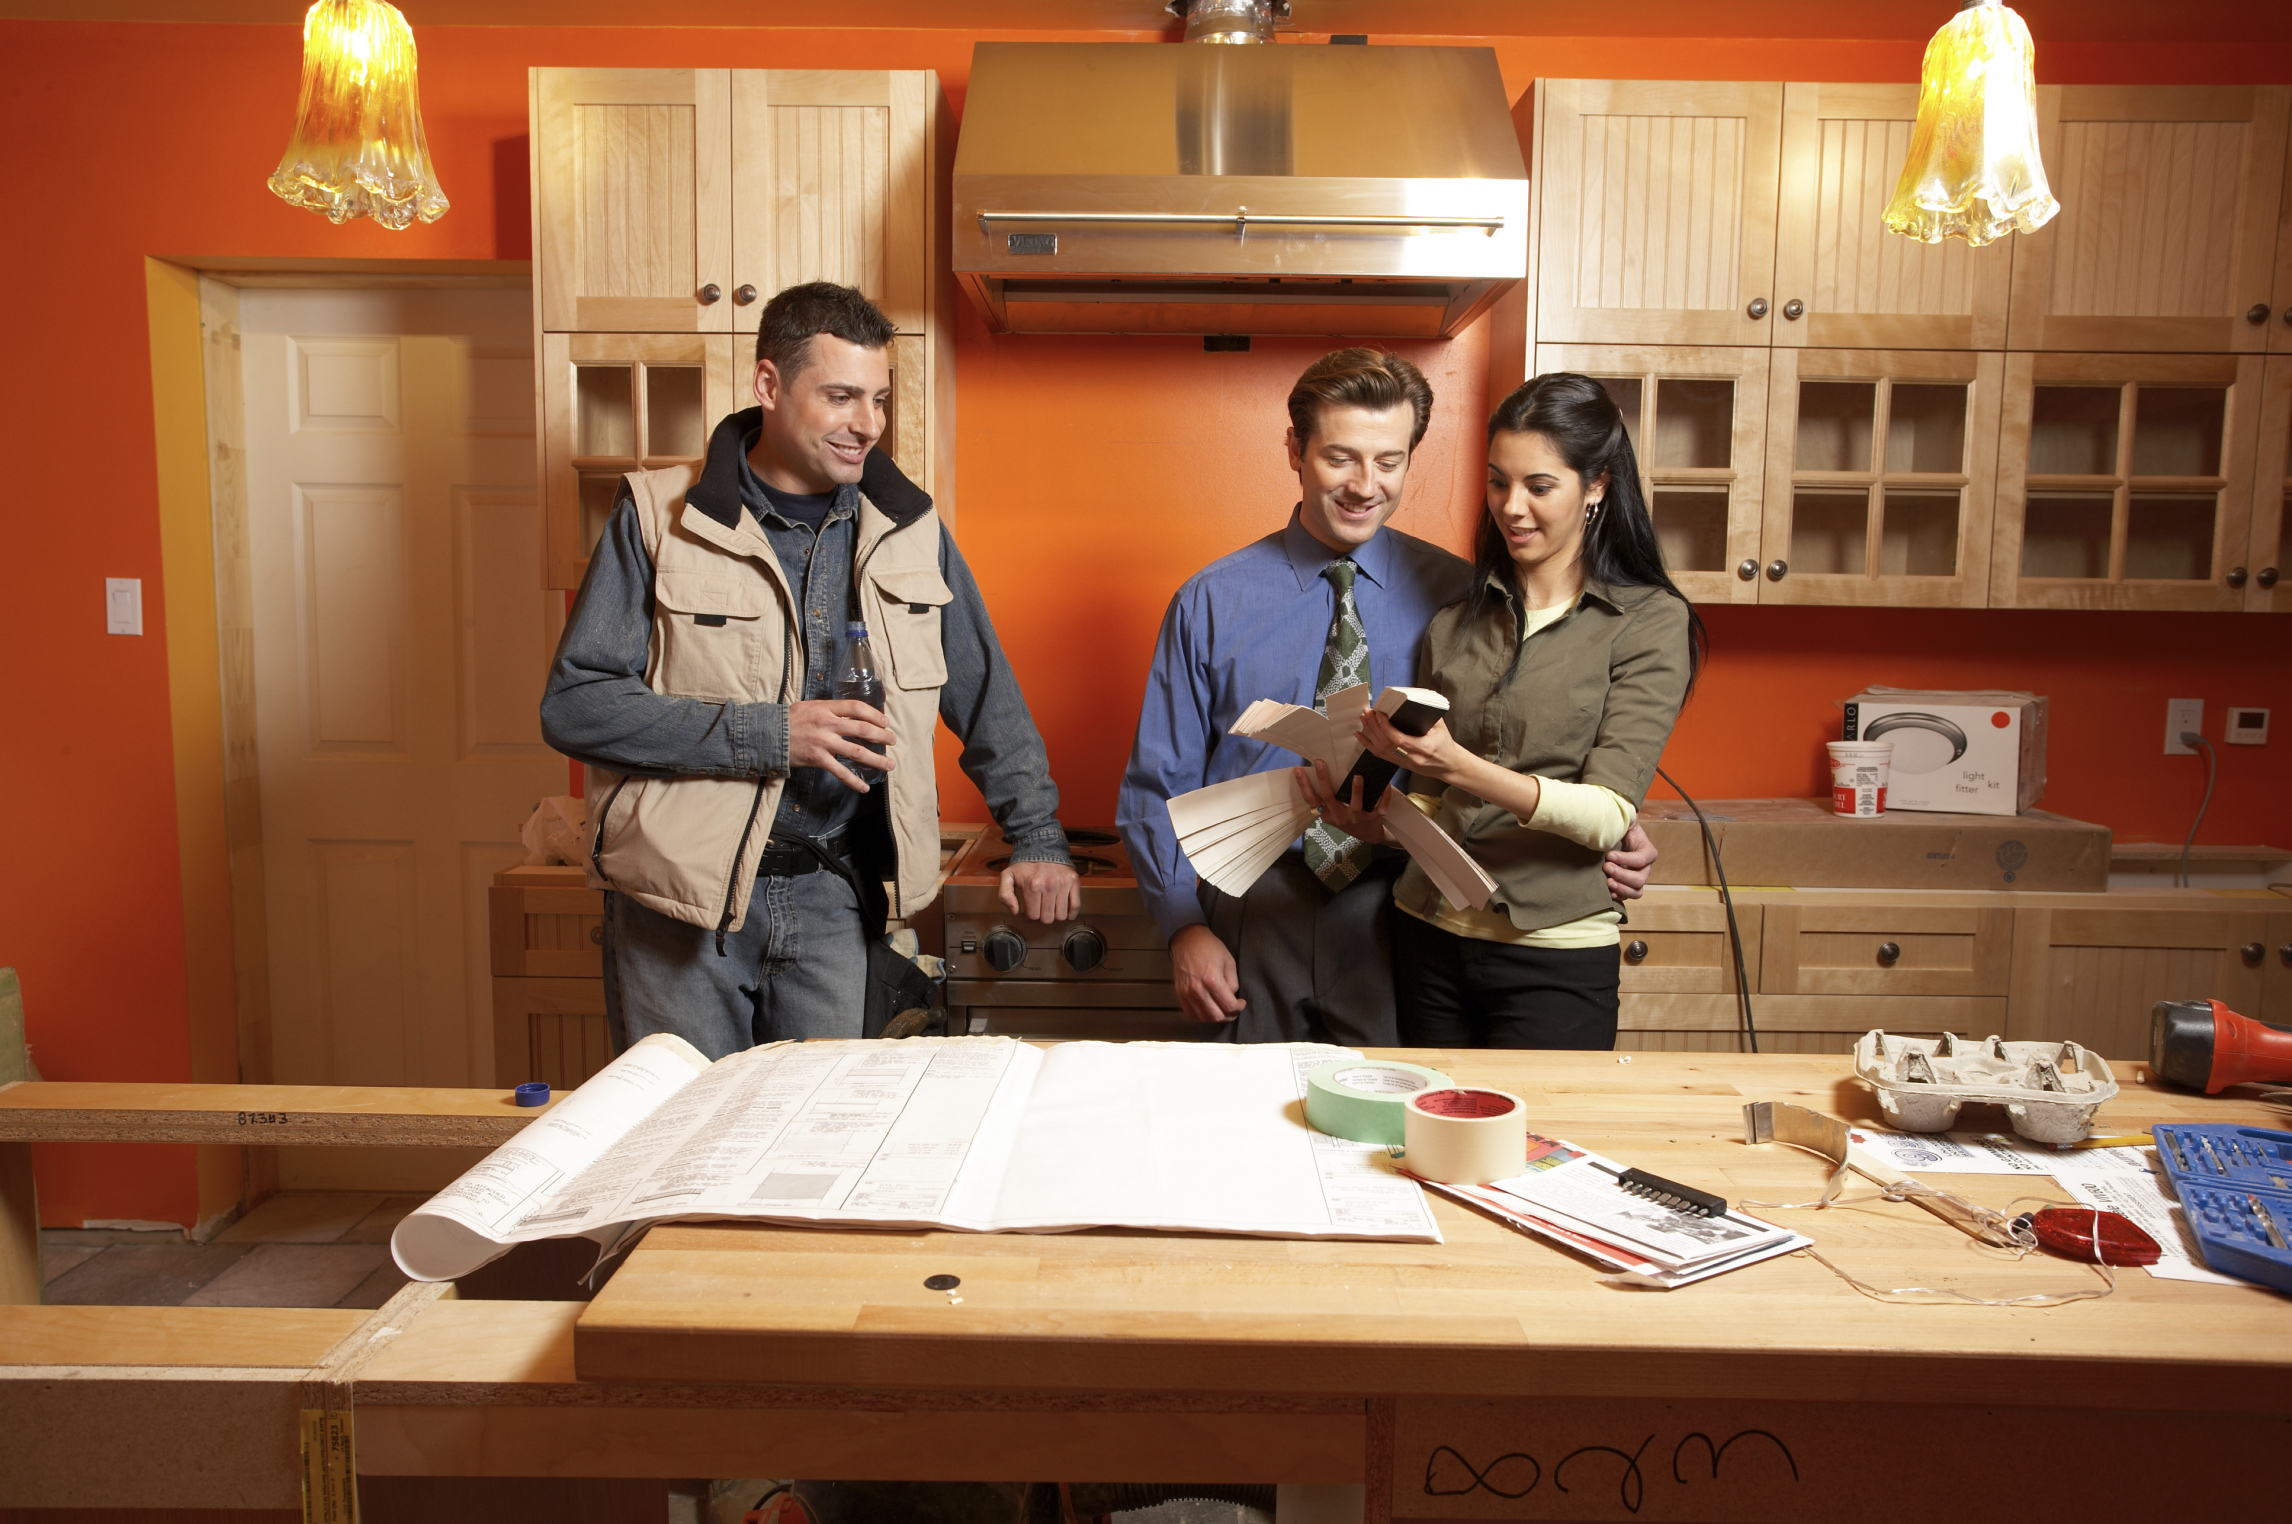 Why Should You Invest In Home Remodeling?